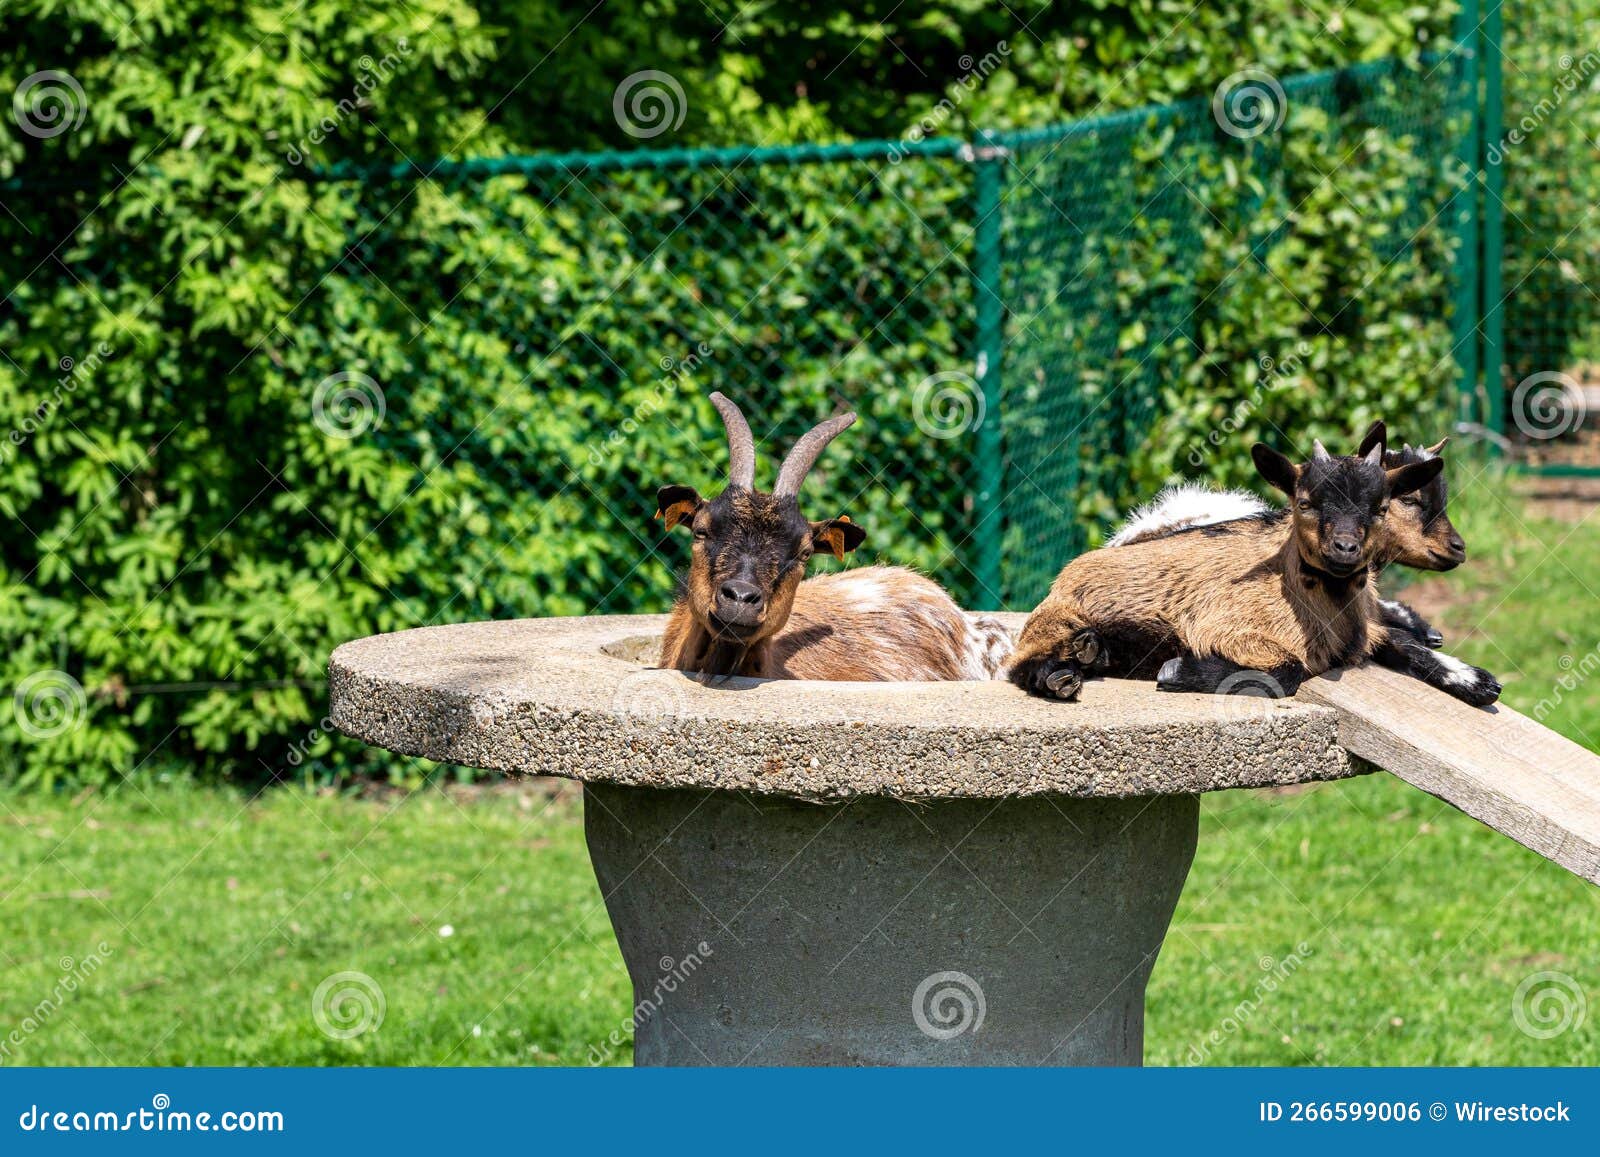 Mother Goat and Two Baby Goats Enjoying the Sunny Day Stock Photo ...